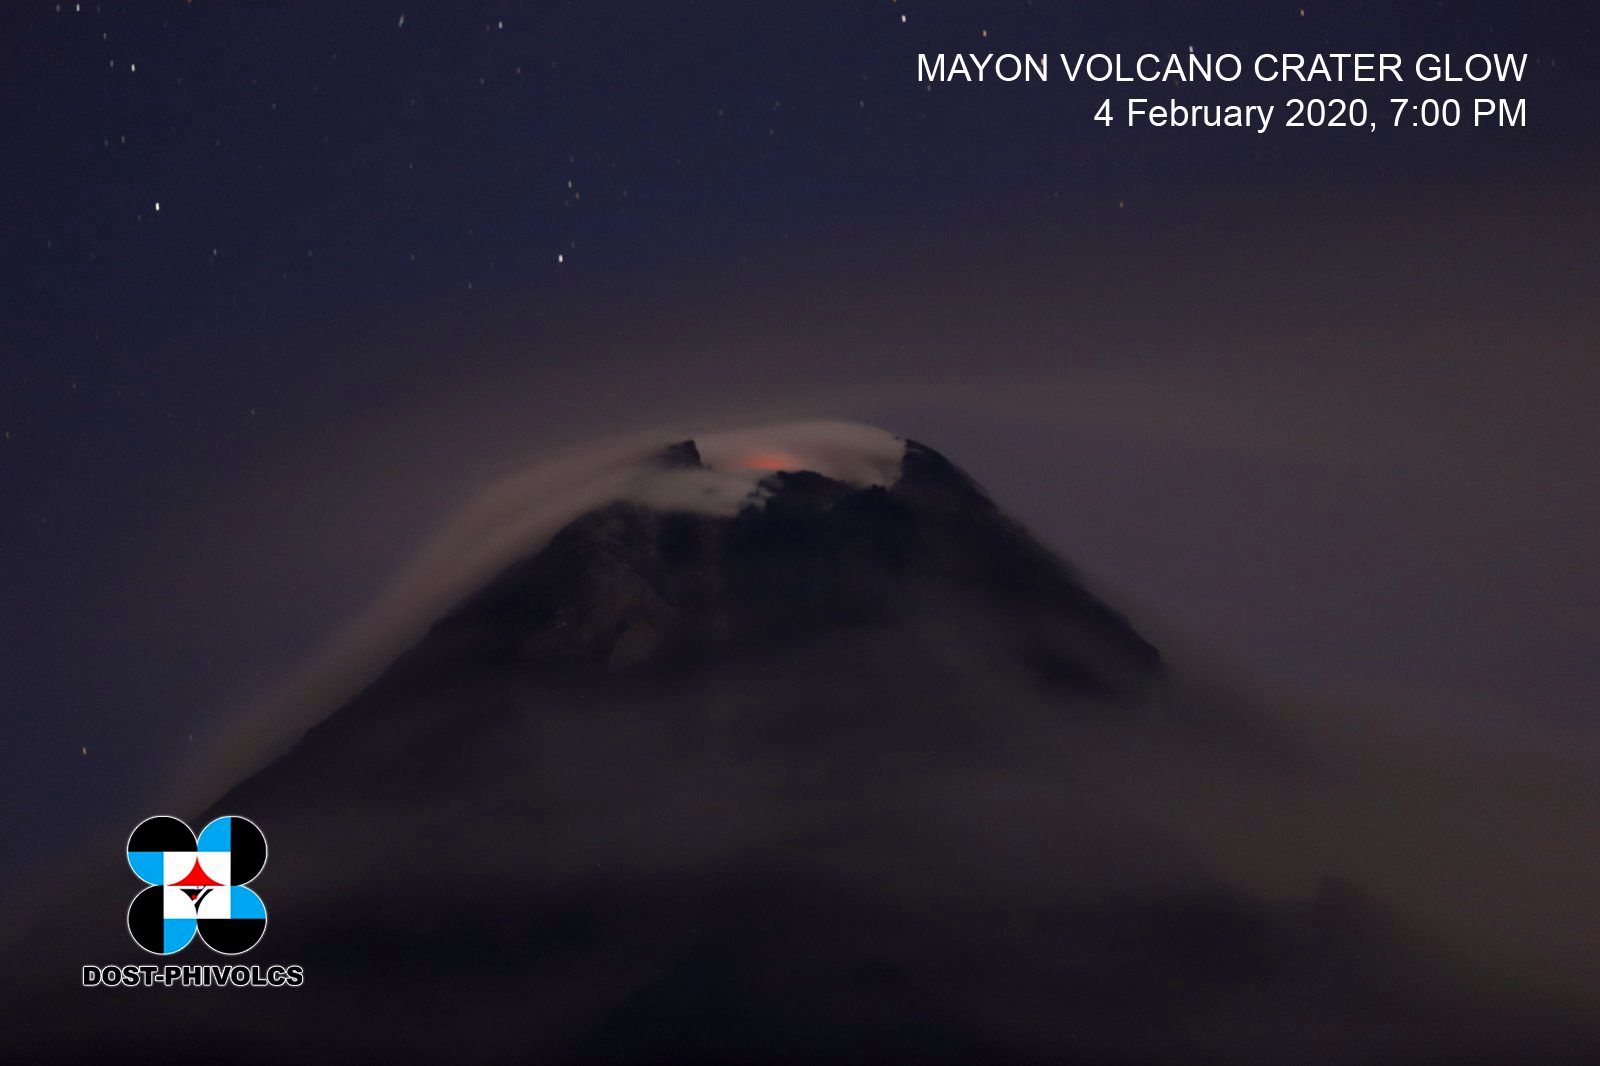 Mayon - incandescence at the summit crater - photo archive Dost-Phivolcs 04.02.2020 / 19h